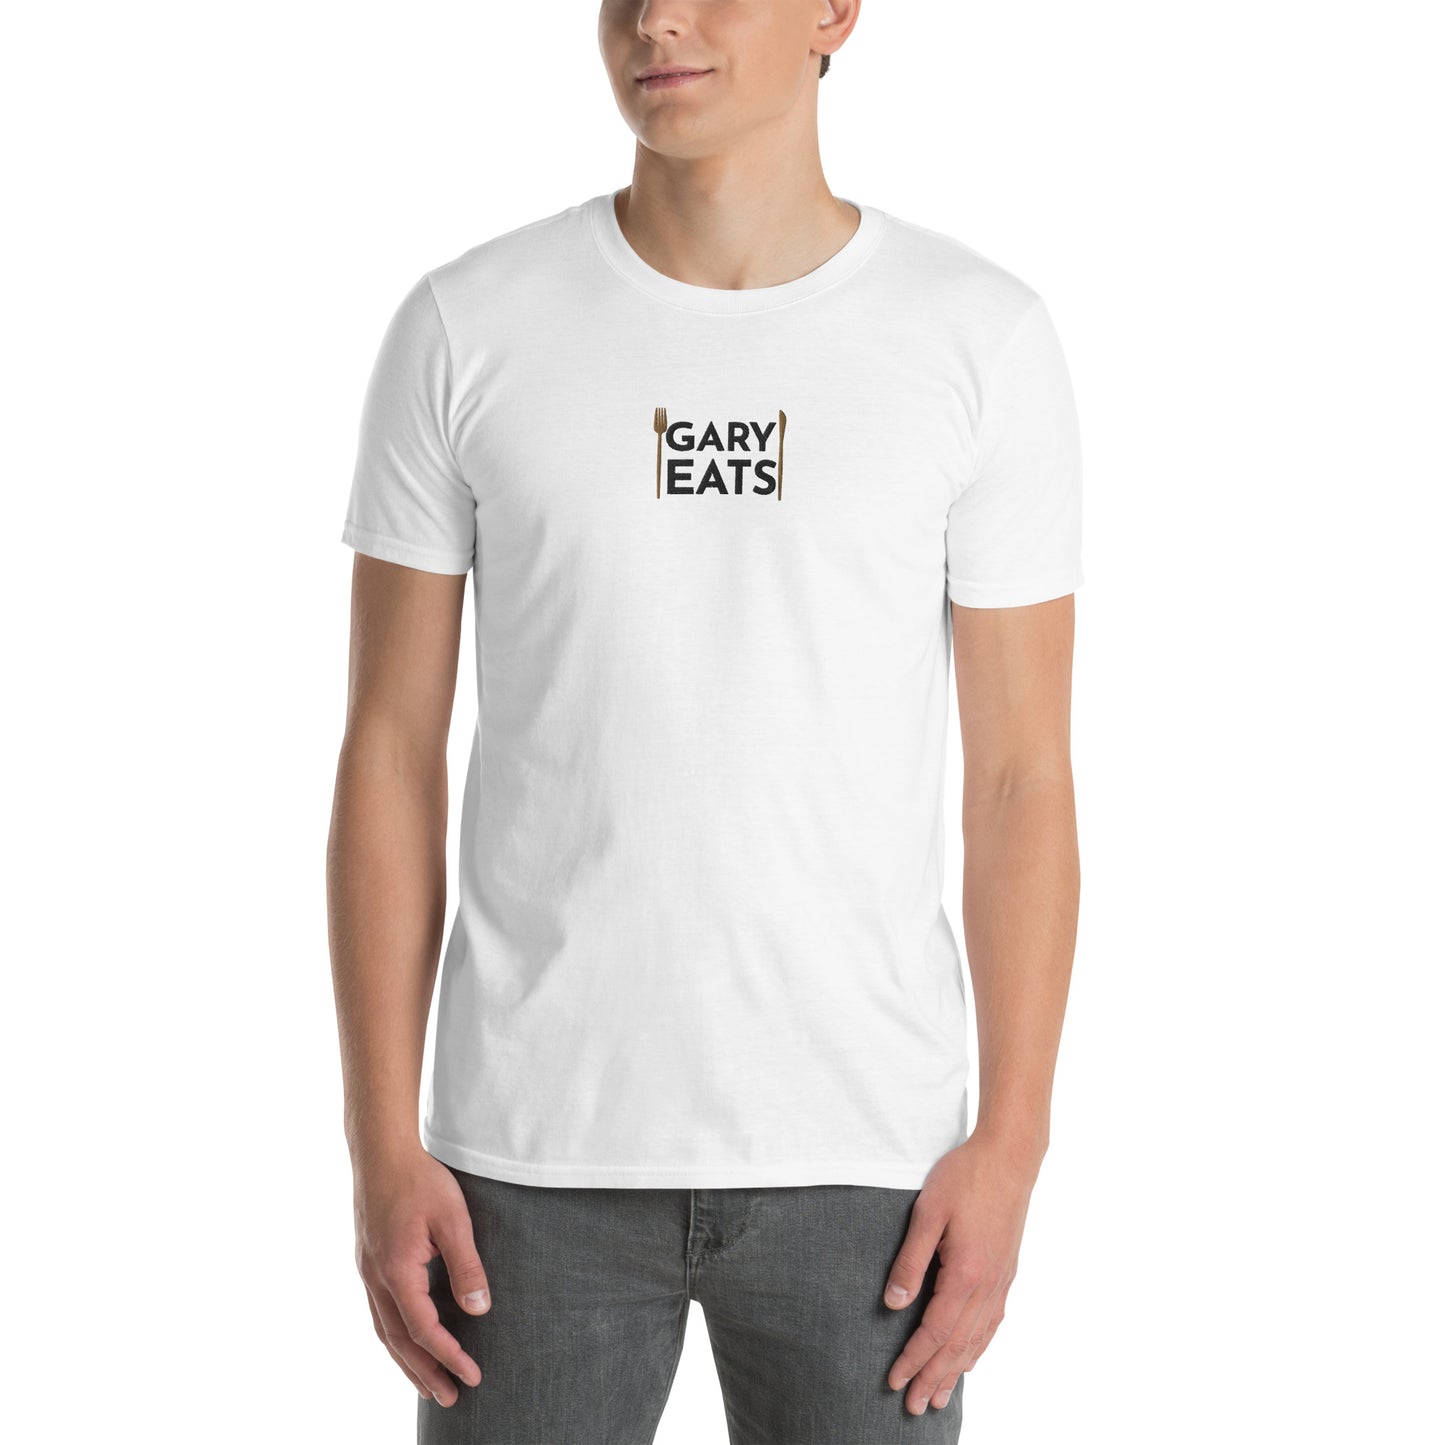 Gary Eats Embroidered Unisex T-Shirt